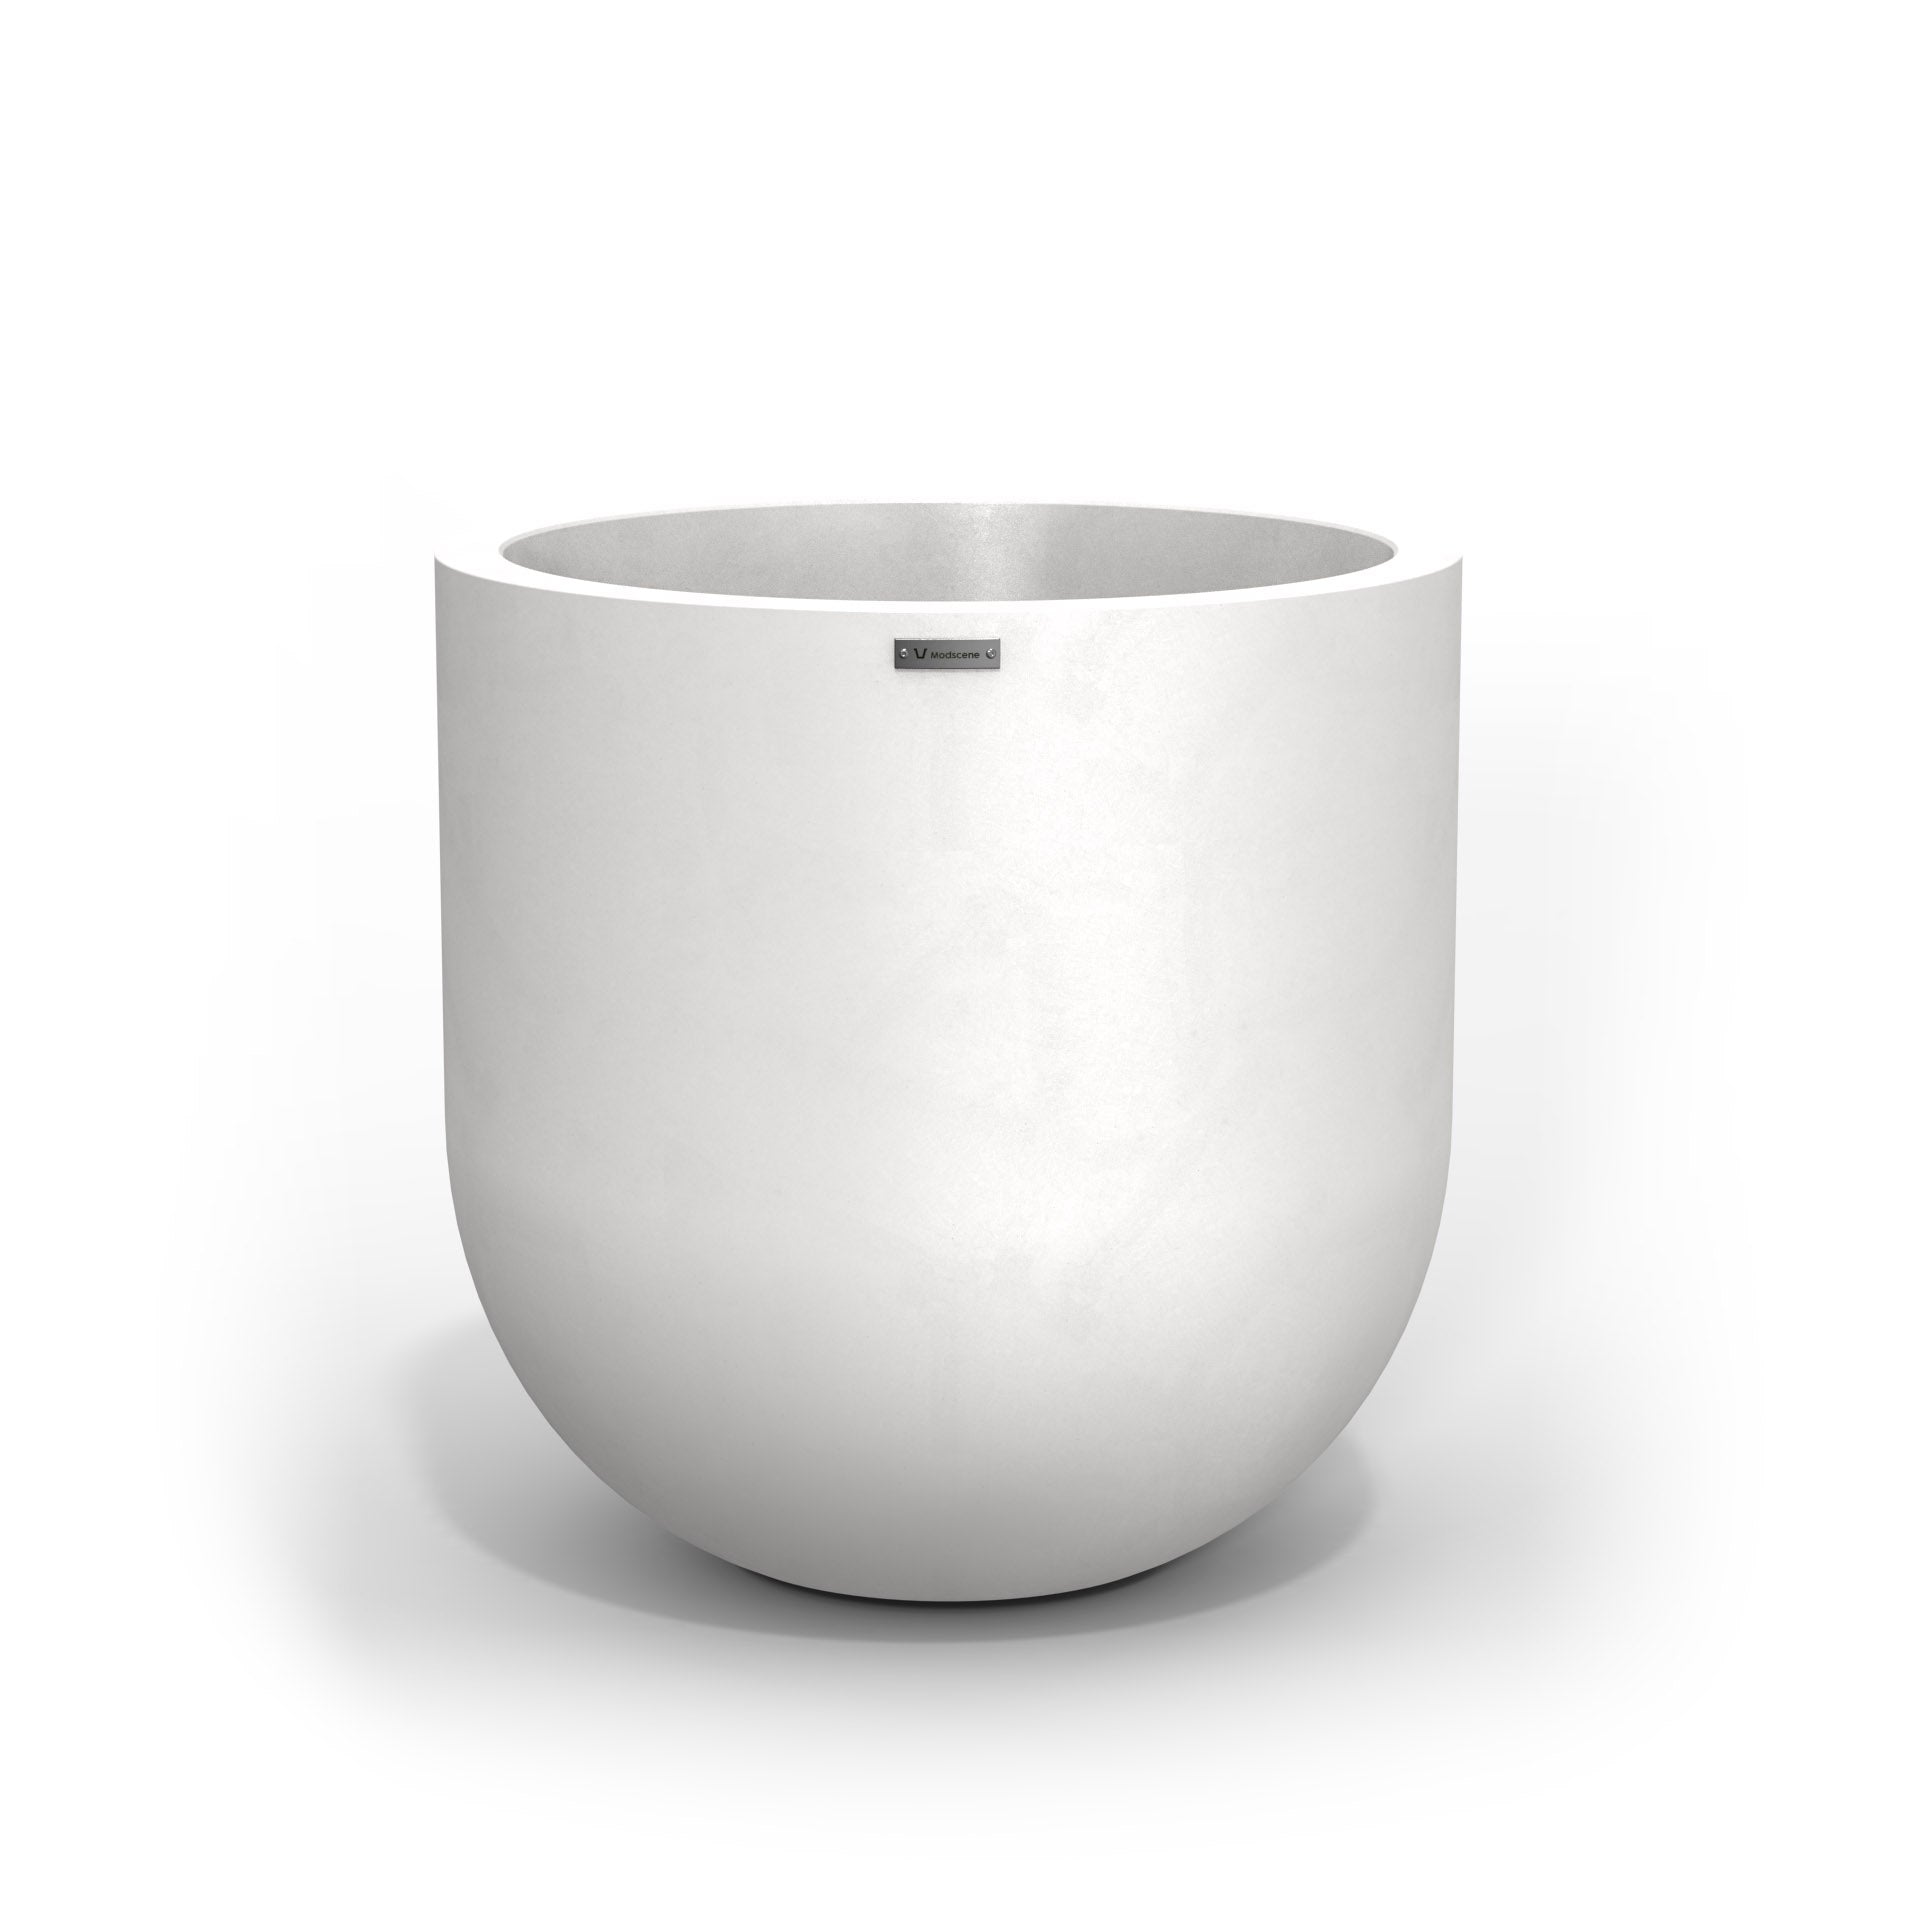 Large Modscene planter pot in a white colour with a matte finish. NZ made